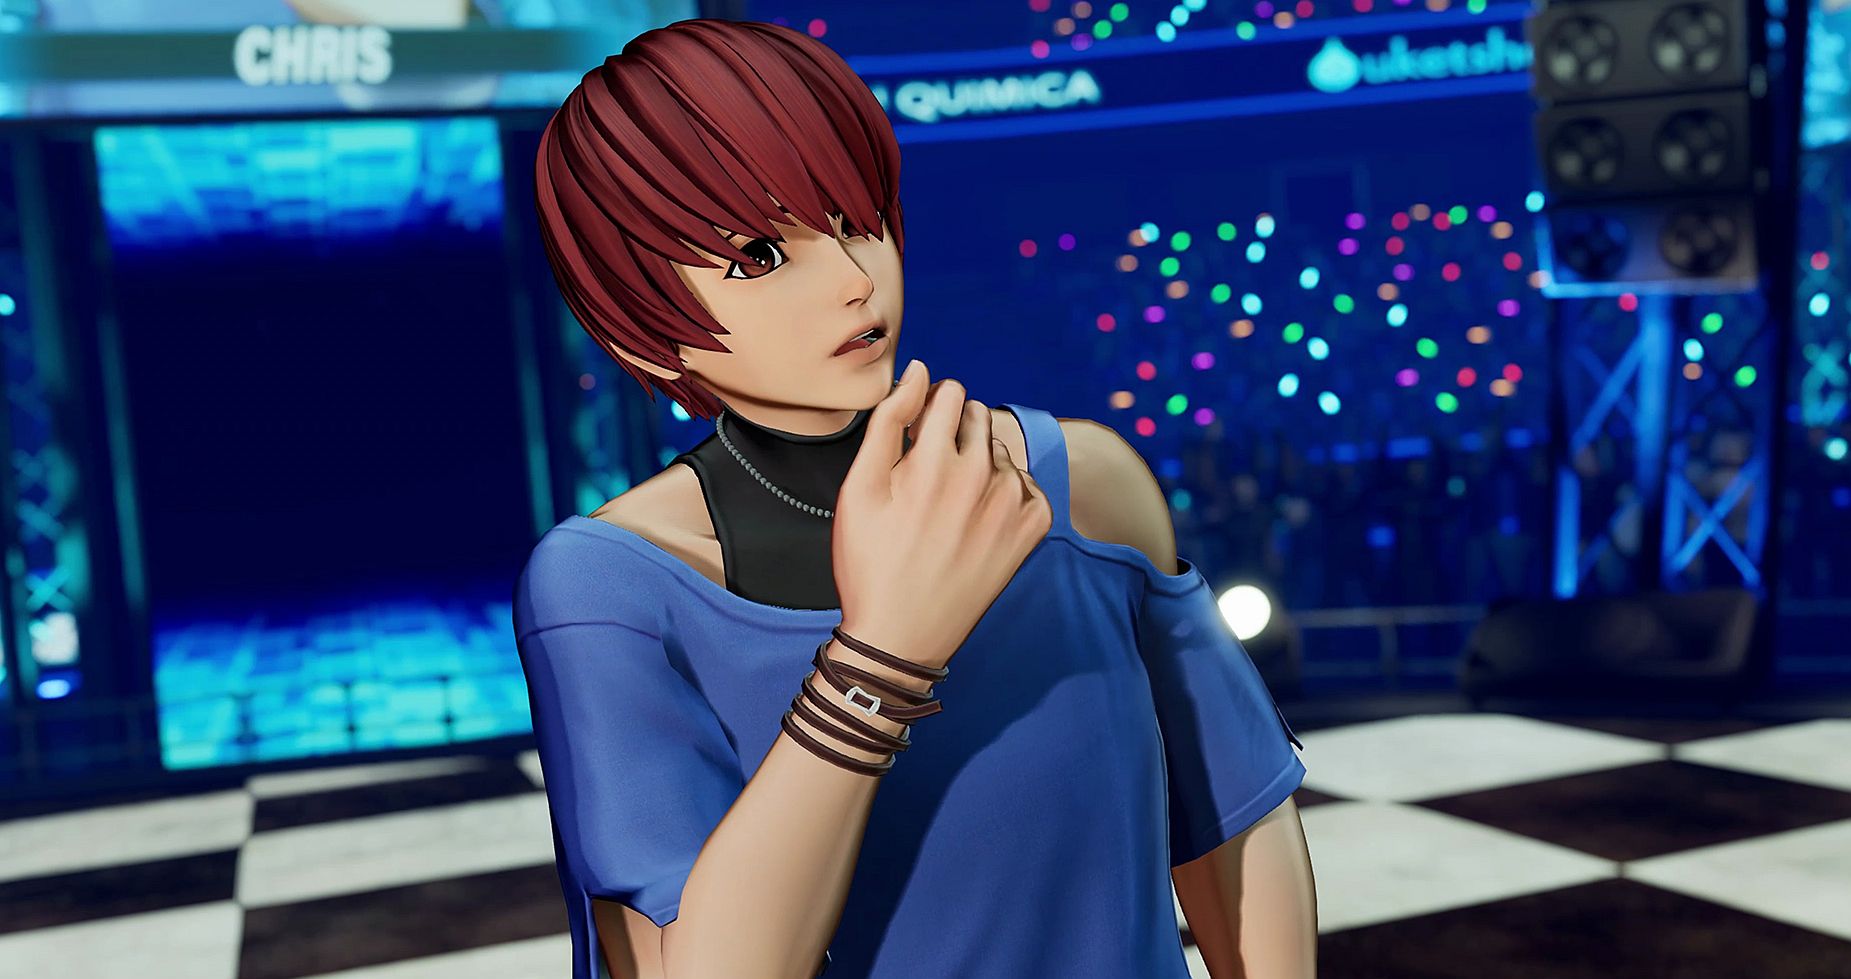 Image for The King of Fighters 15 shows off Chris in latest trailer